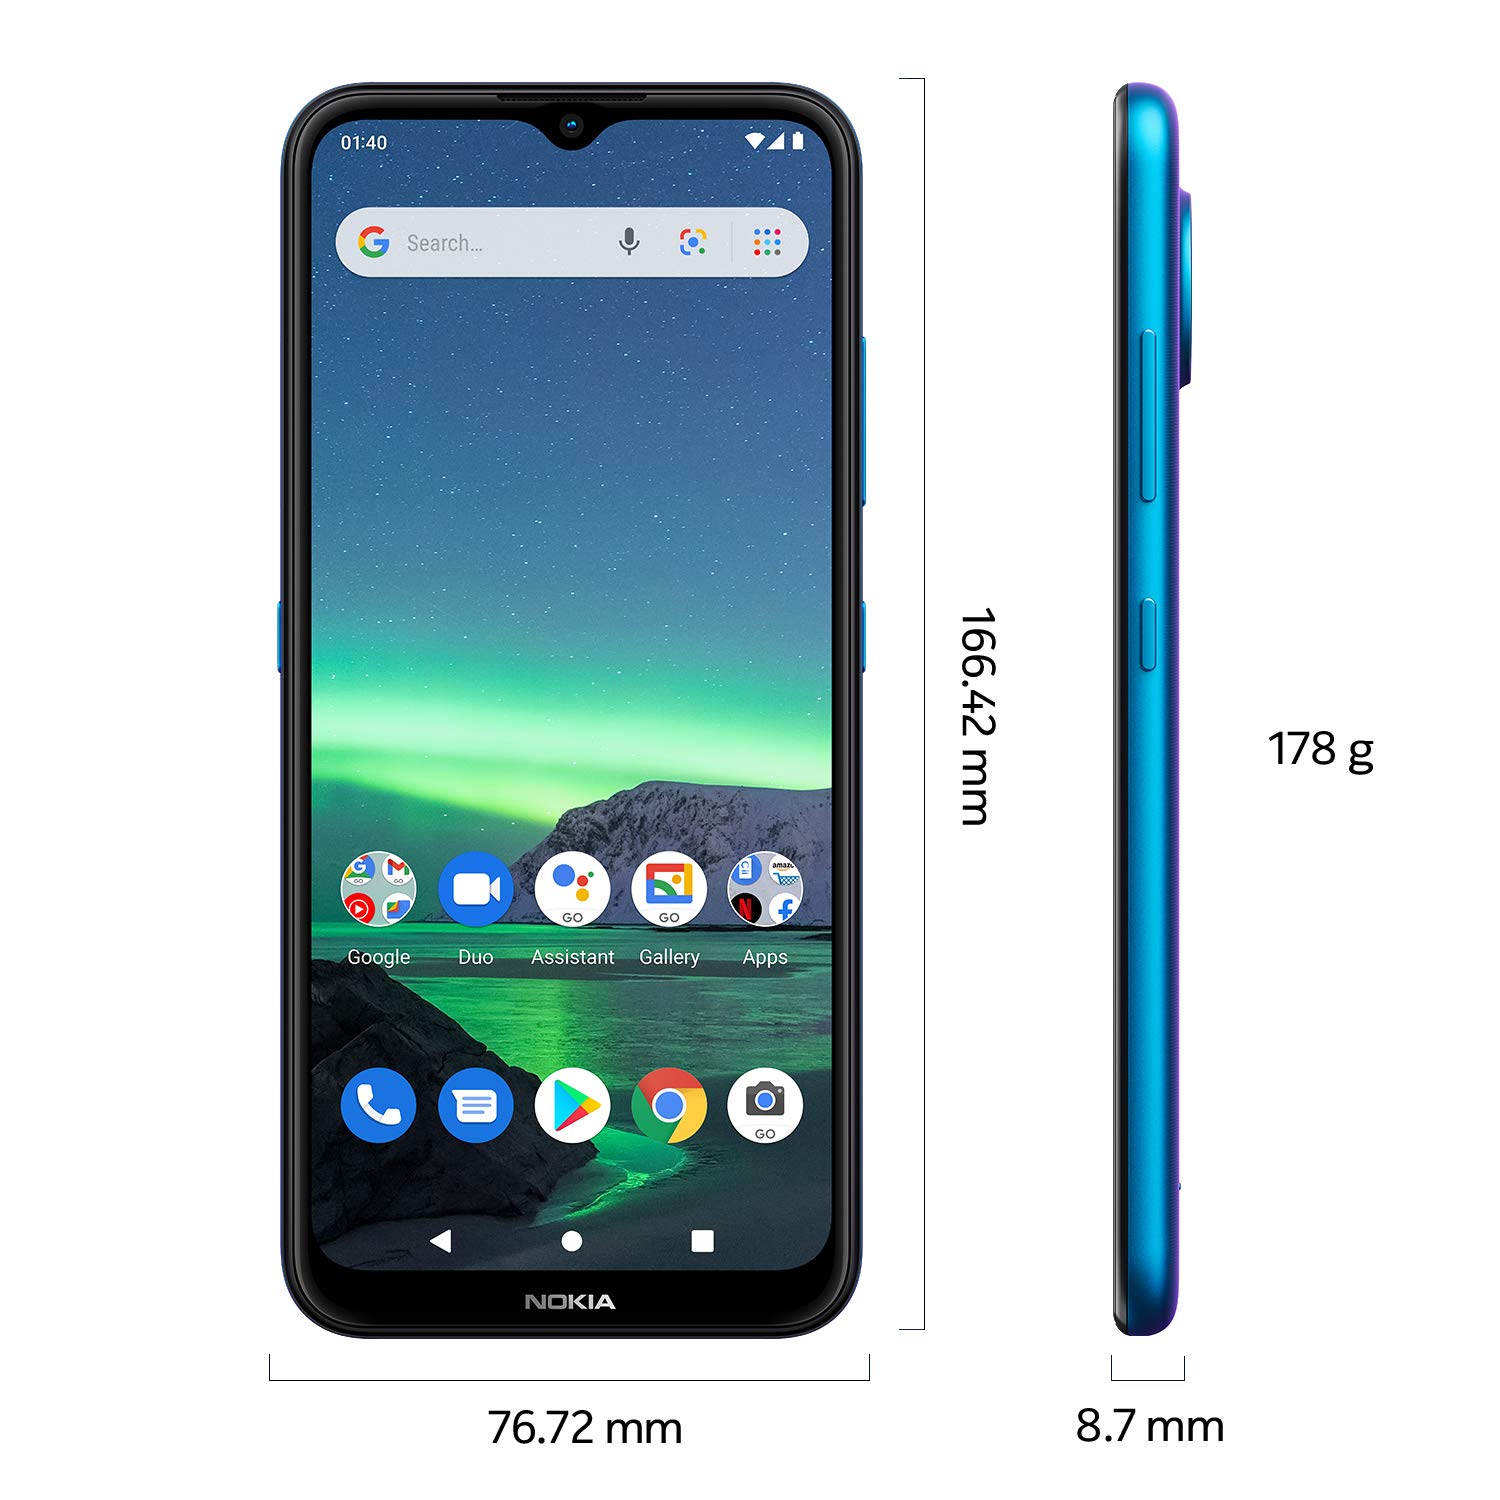 Nokia 1.4 | Android 10 (Go Edition) | Unlocked Smartphone | 2-Day Battery | Dual SIM | US Version| 2/32GB | 6.51-Inch Screen | Fjord Blue